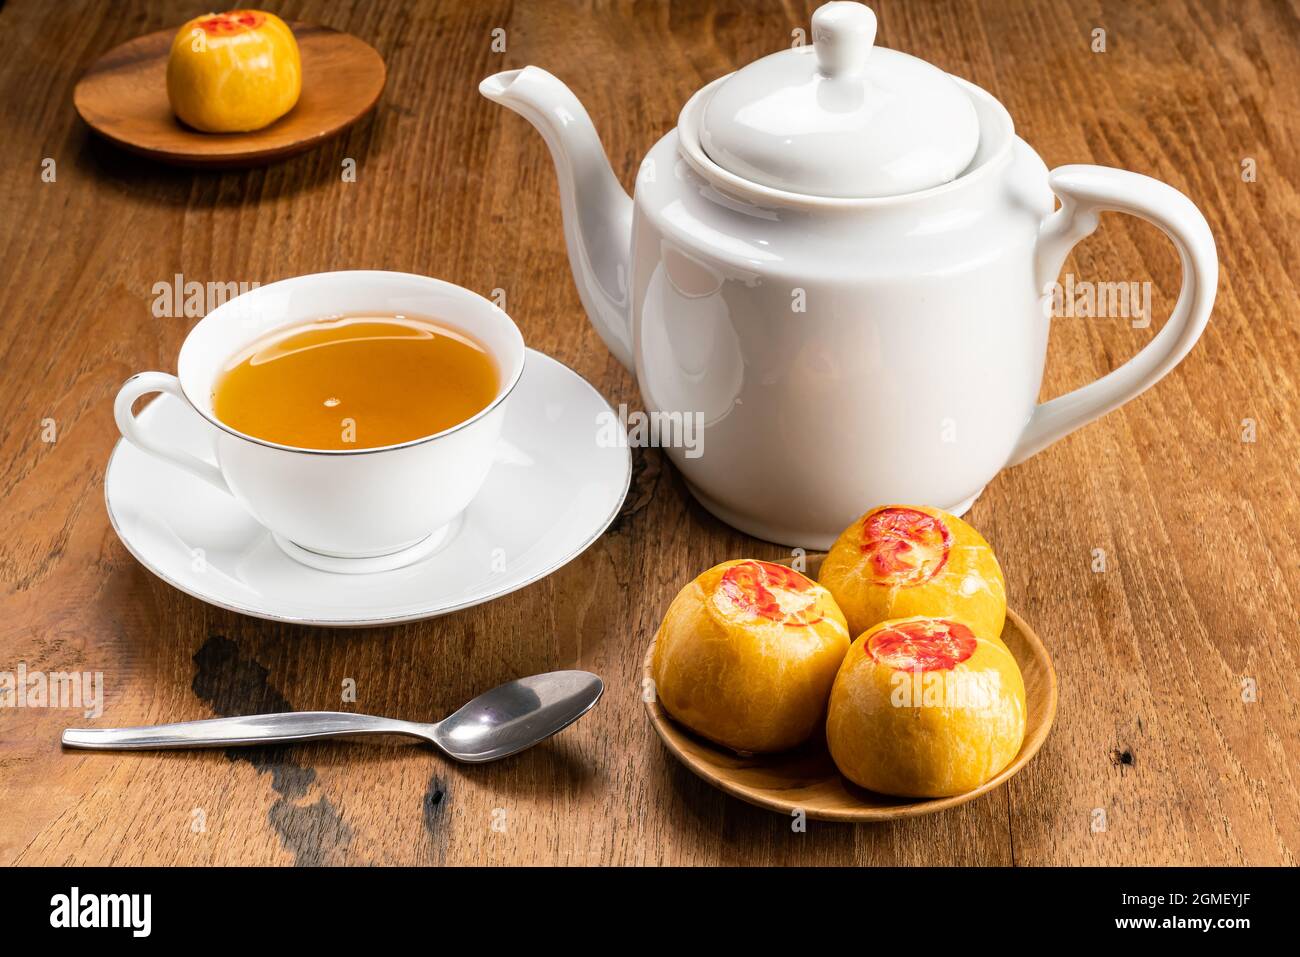 View of sweet chinese pastry or moon cake filled with sweet mung bean paste and a white ceramic cup of hot tea with kettle and metal spoon on wooden t Stock Photo